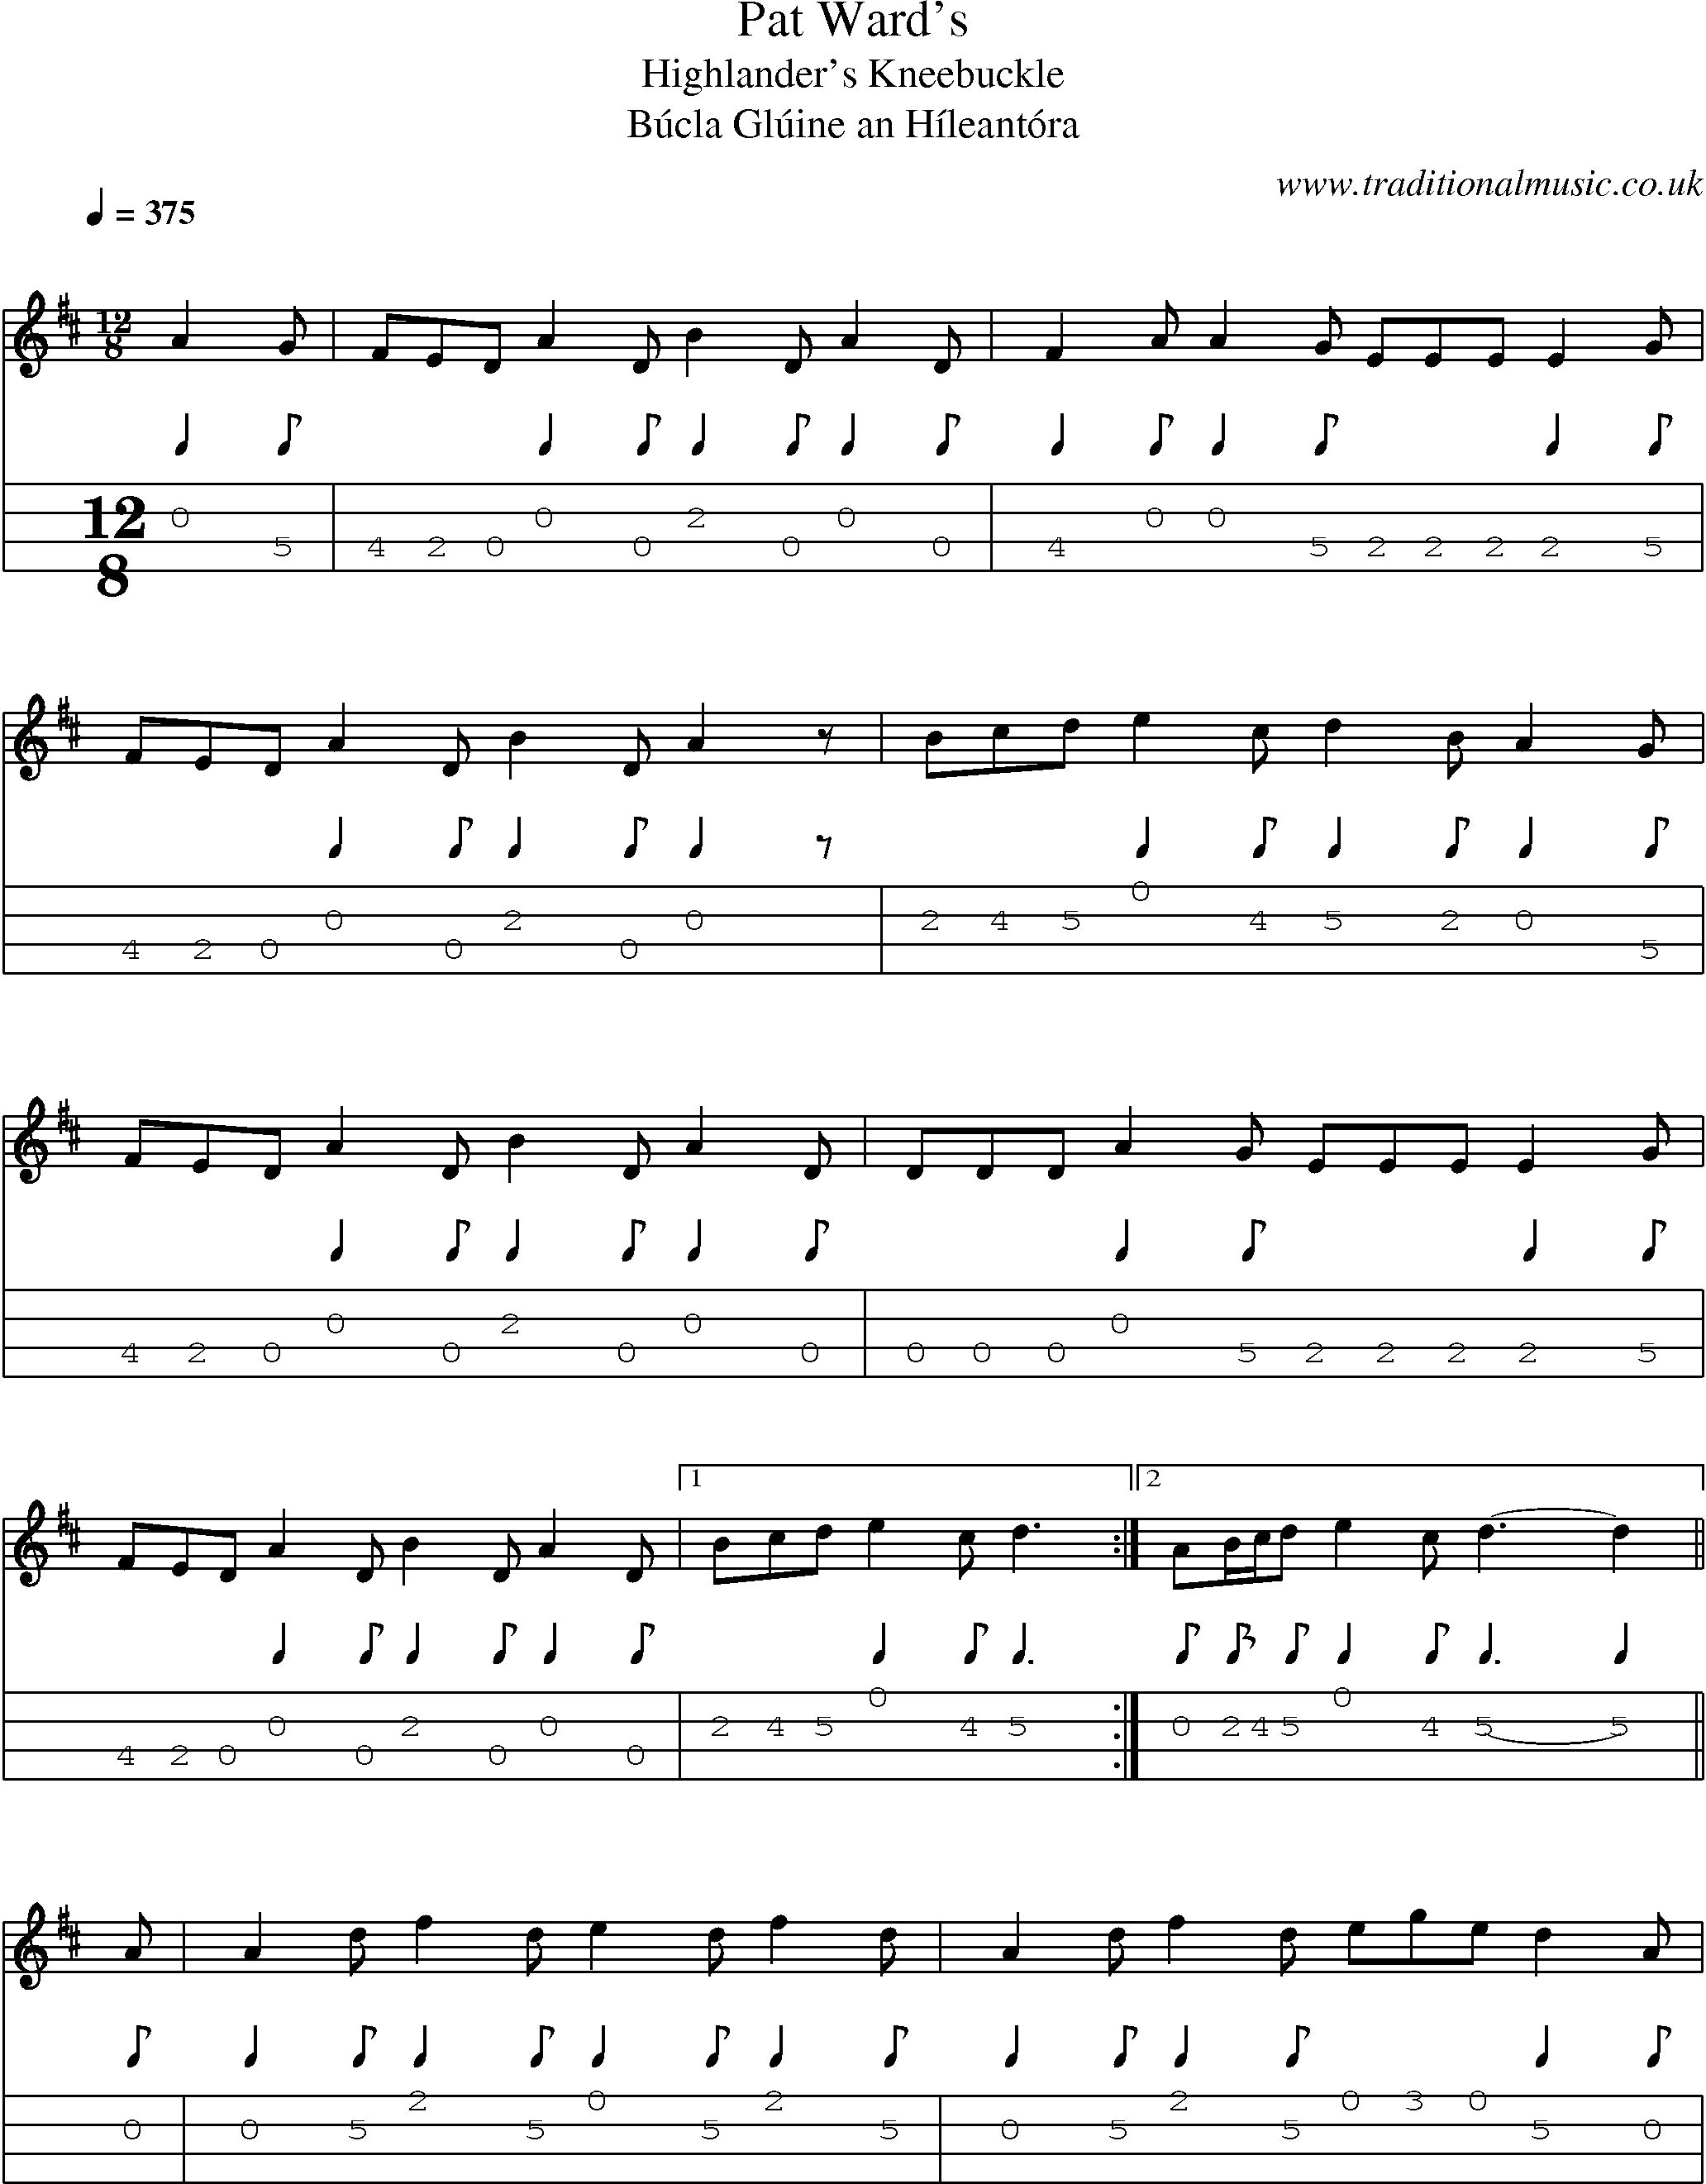 Music Score and Mandolin Tabs for Pat Wards